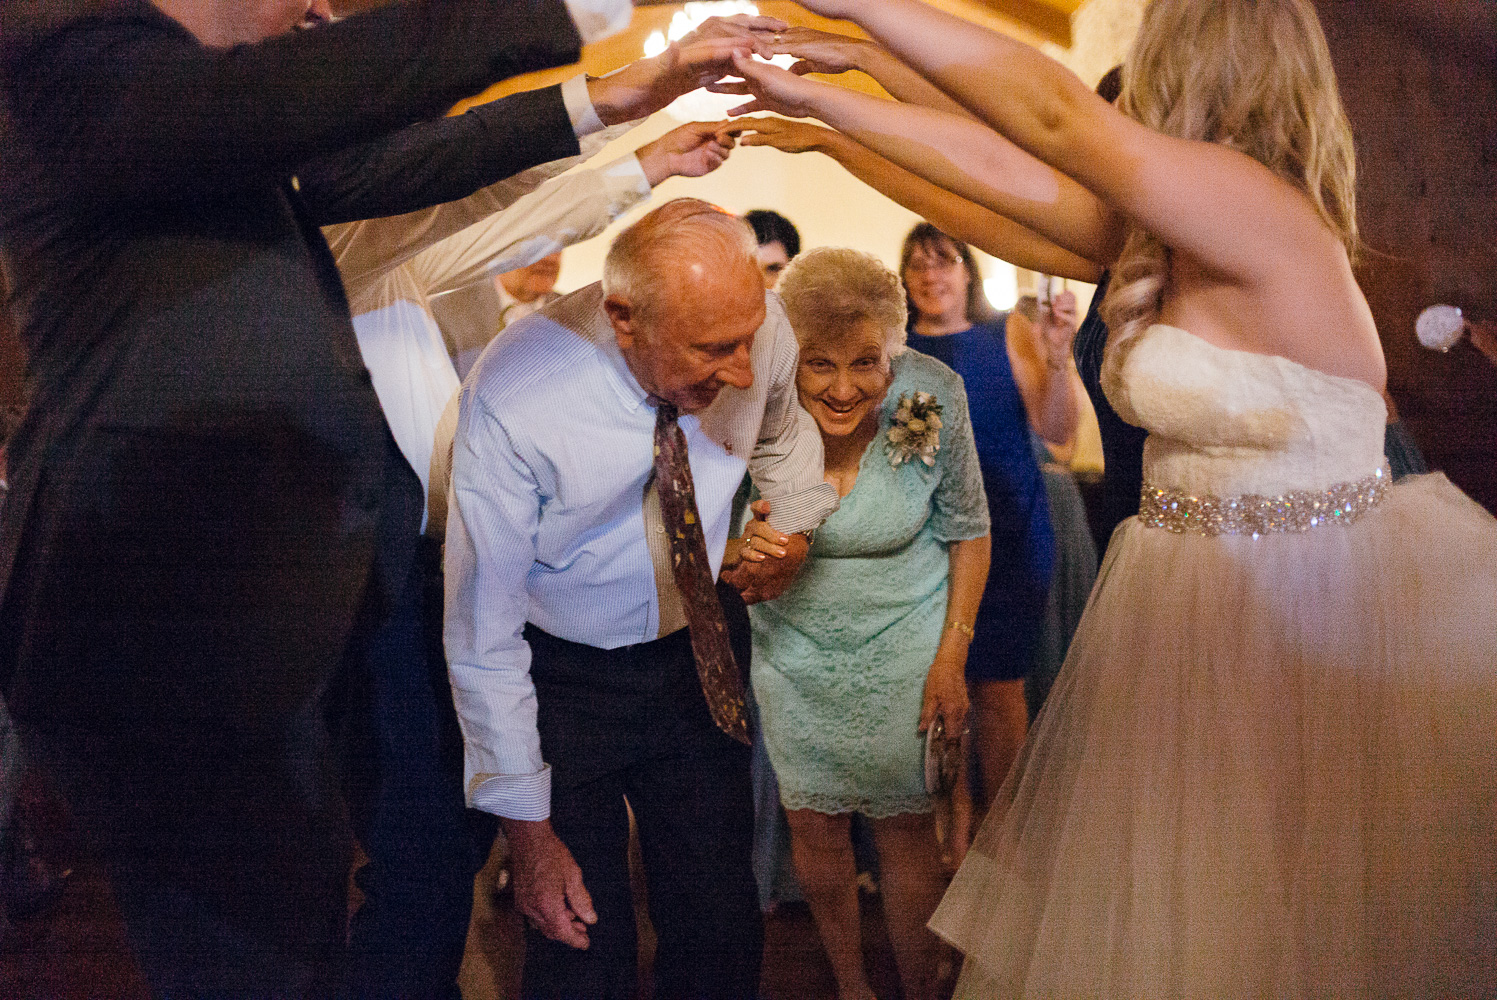 The Grand March - Polish wedding style with the grandparents Chandelier of Gruene Wedding Reception-44